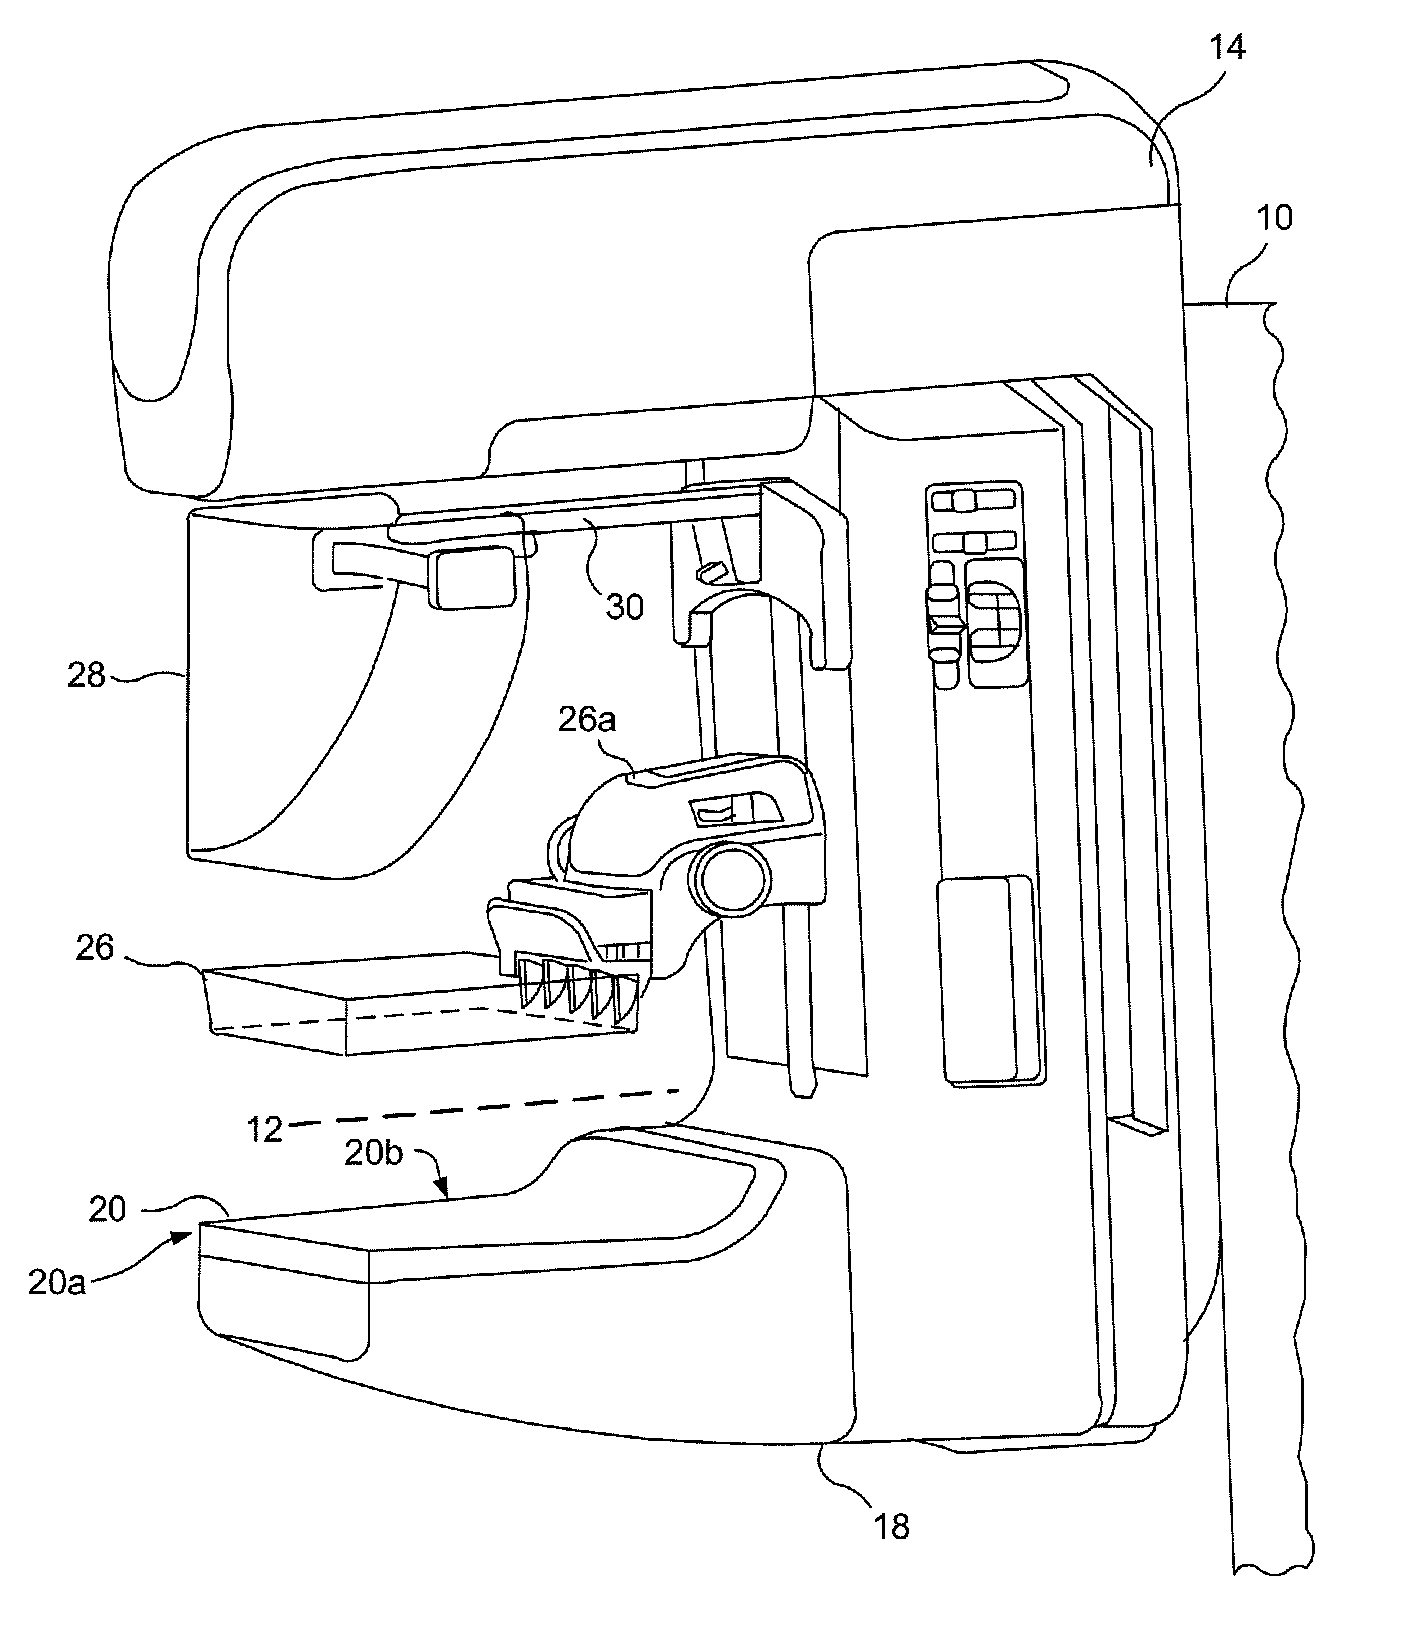 Breast Tomosynthesis System With Shifting Face Shield